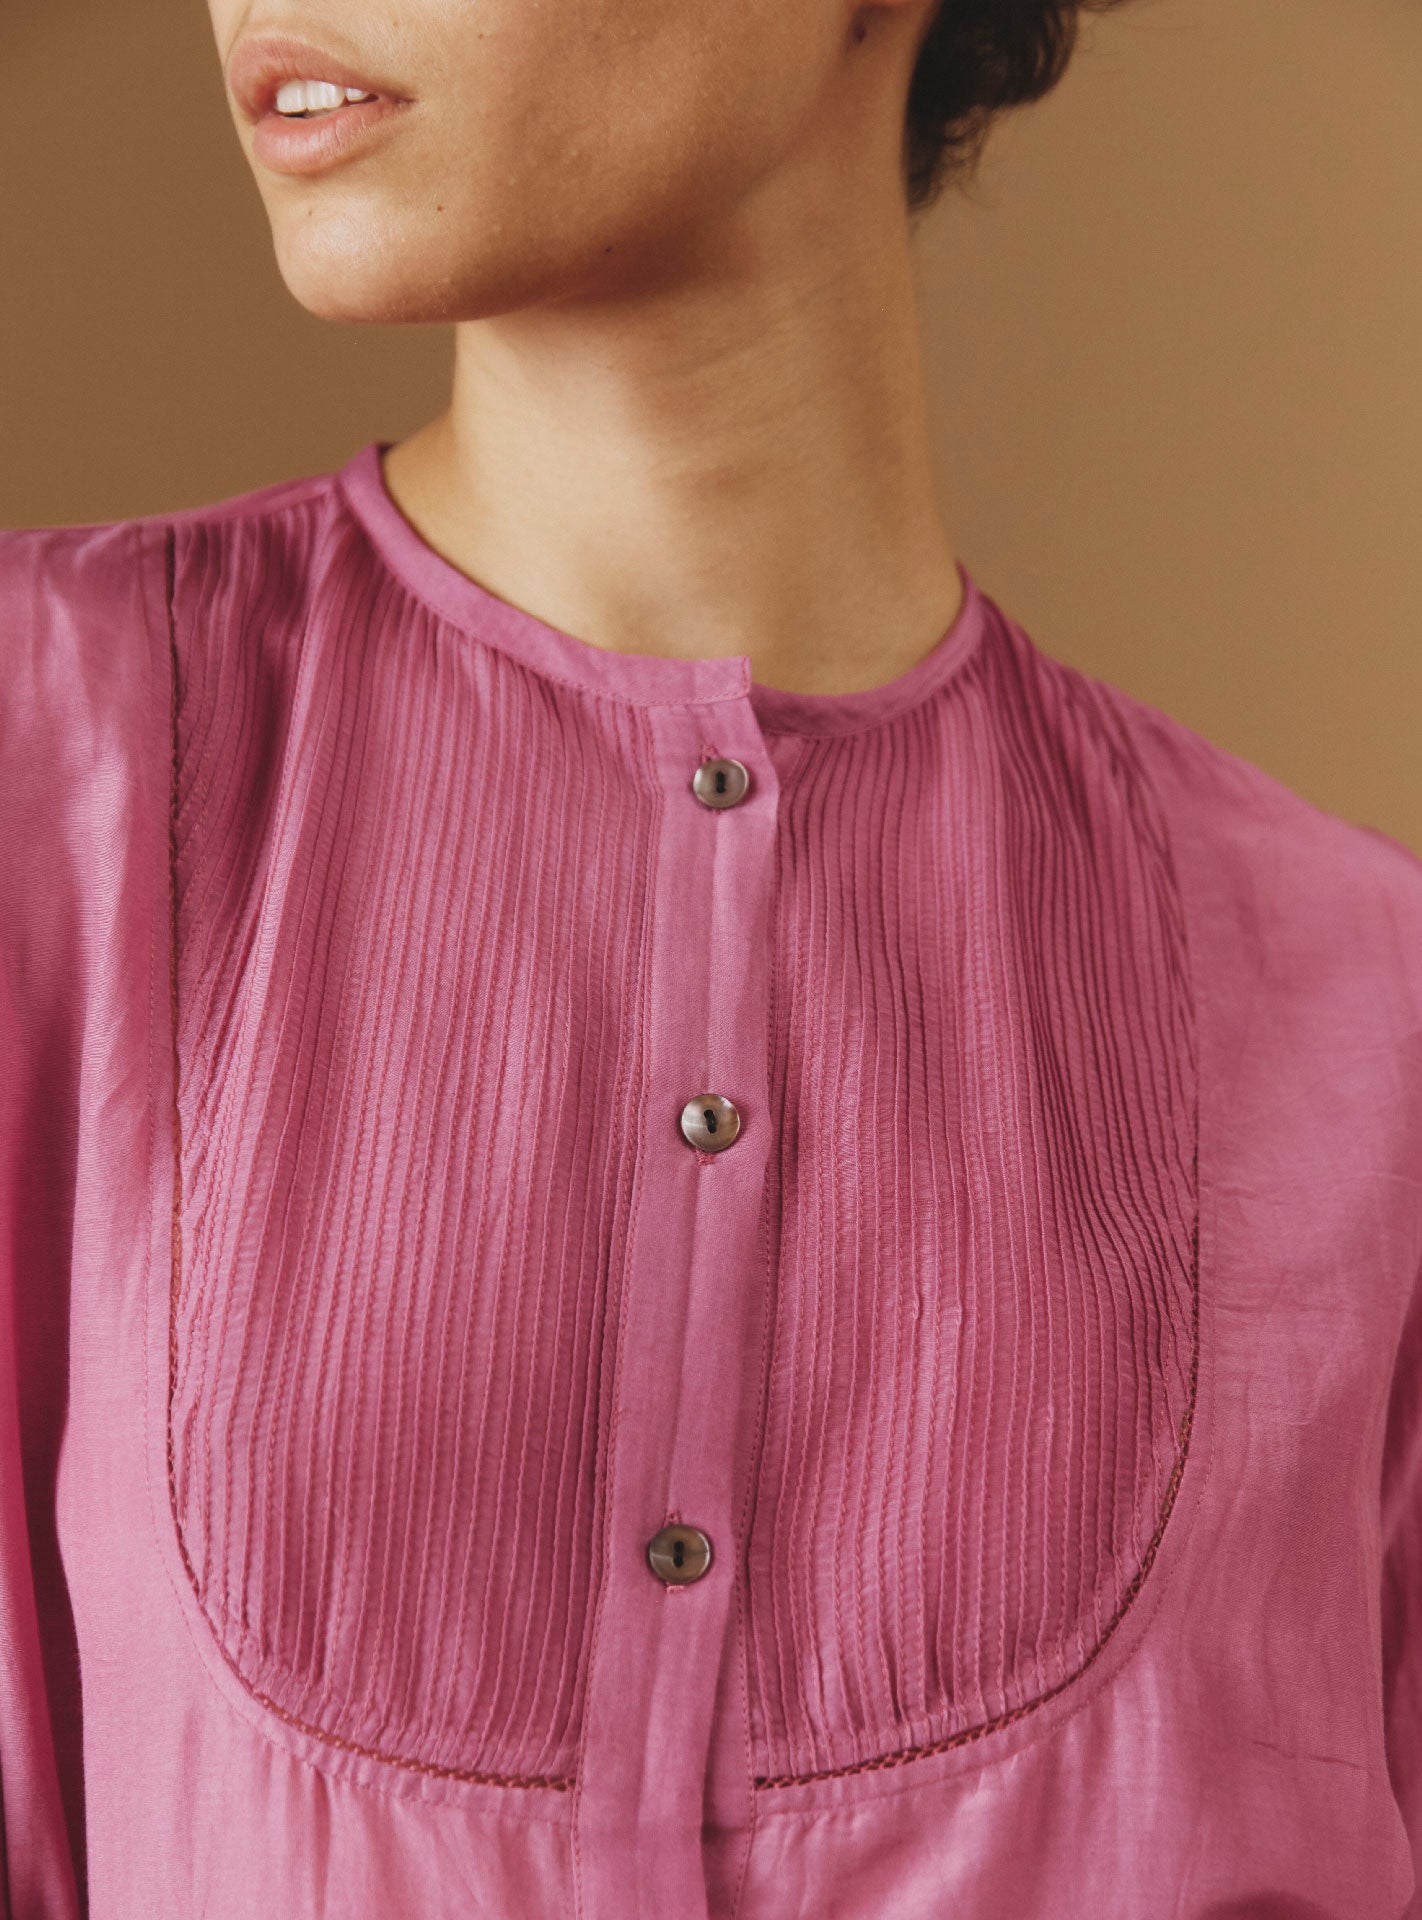 detailed view of neckline ANDREA Magenta Cotton/Silk Blouse by Thierry Colson